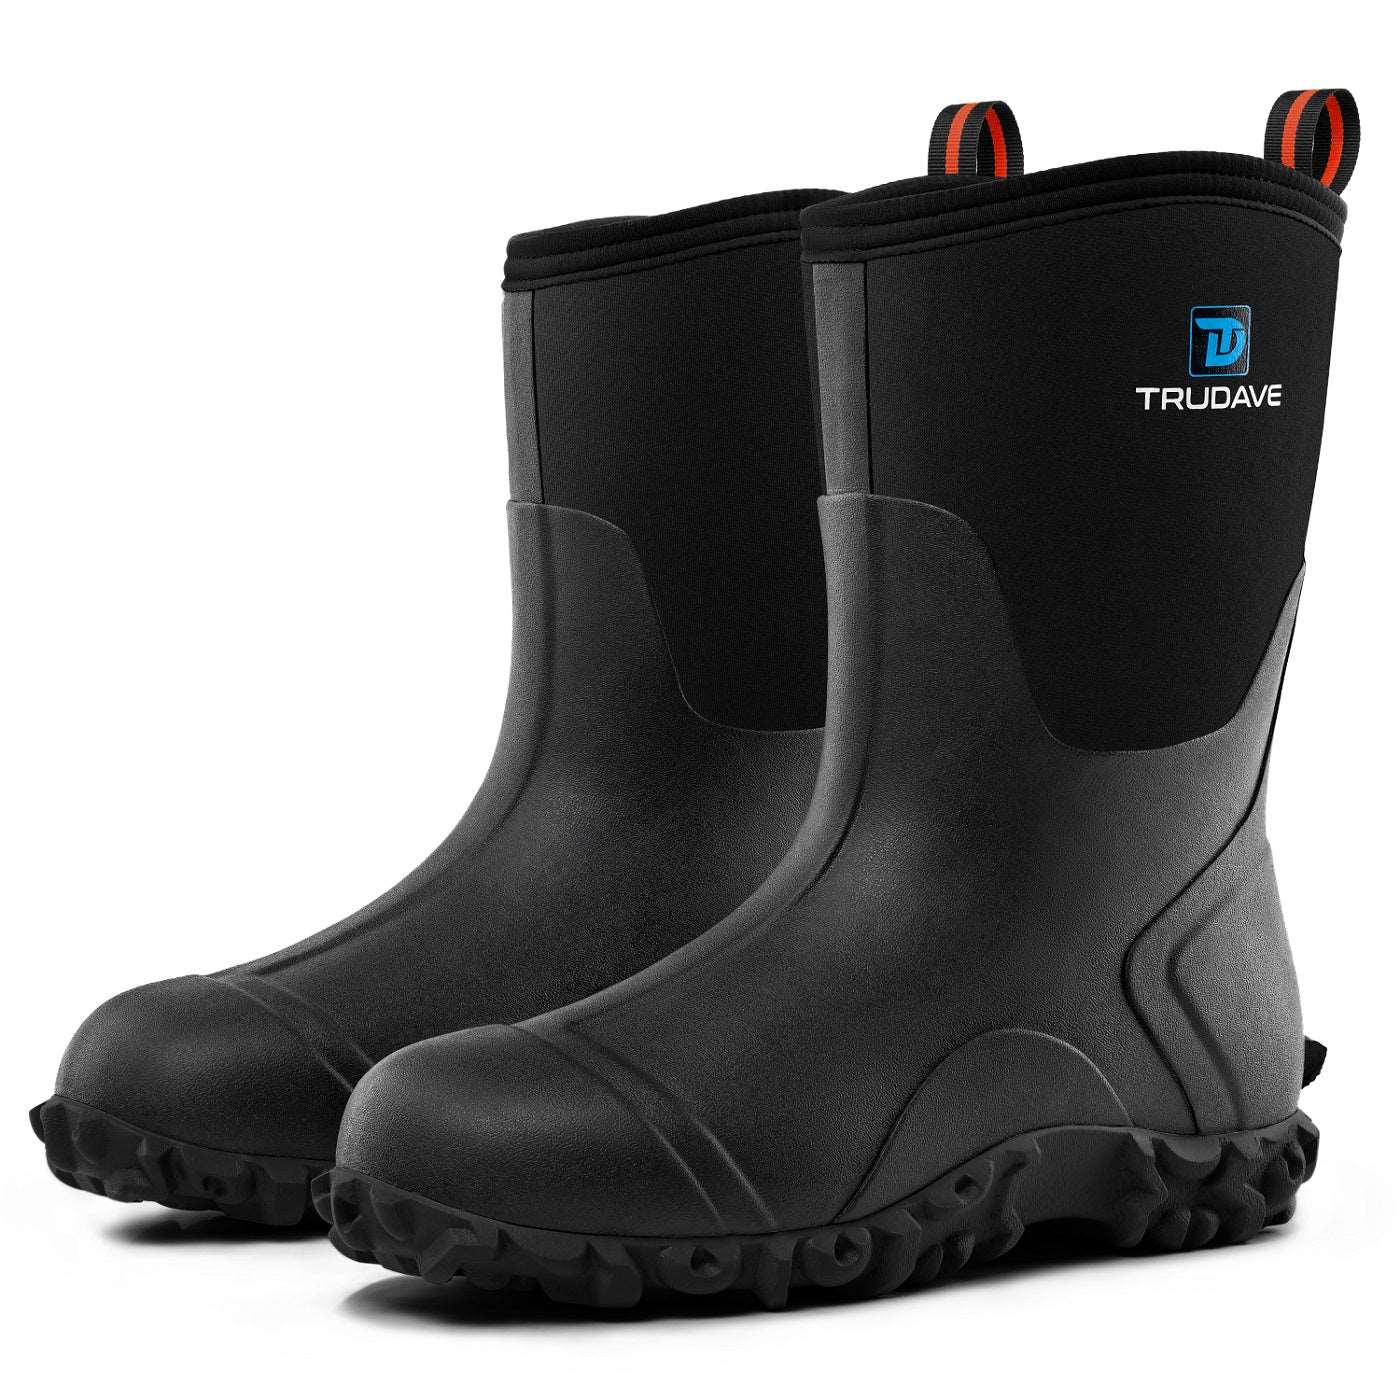 Trudave Women's Rubber Boots with Steel Shank-Black